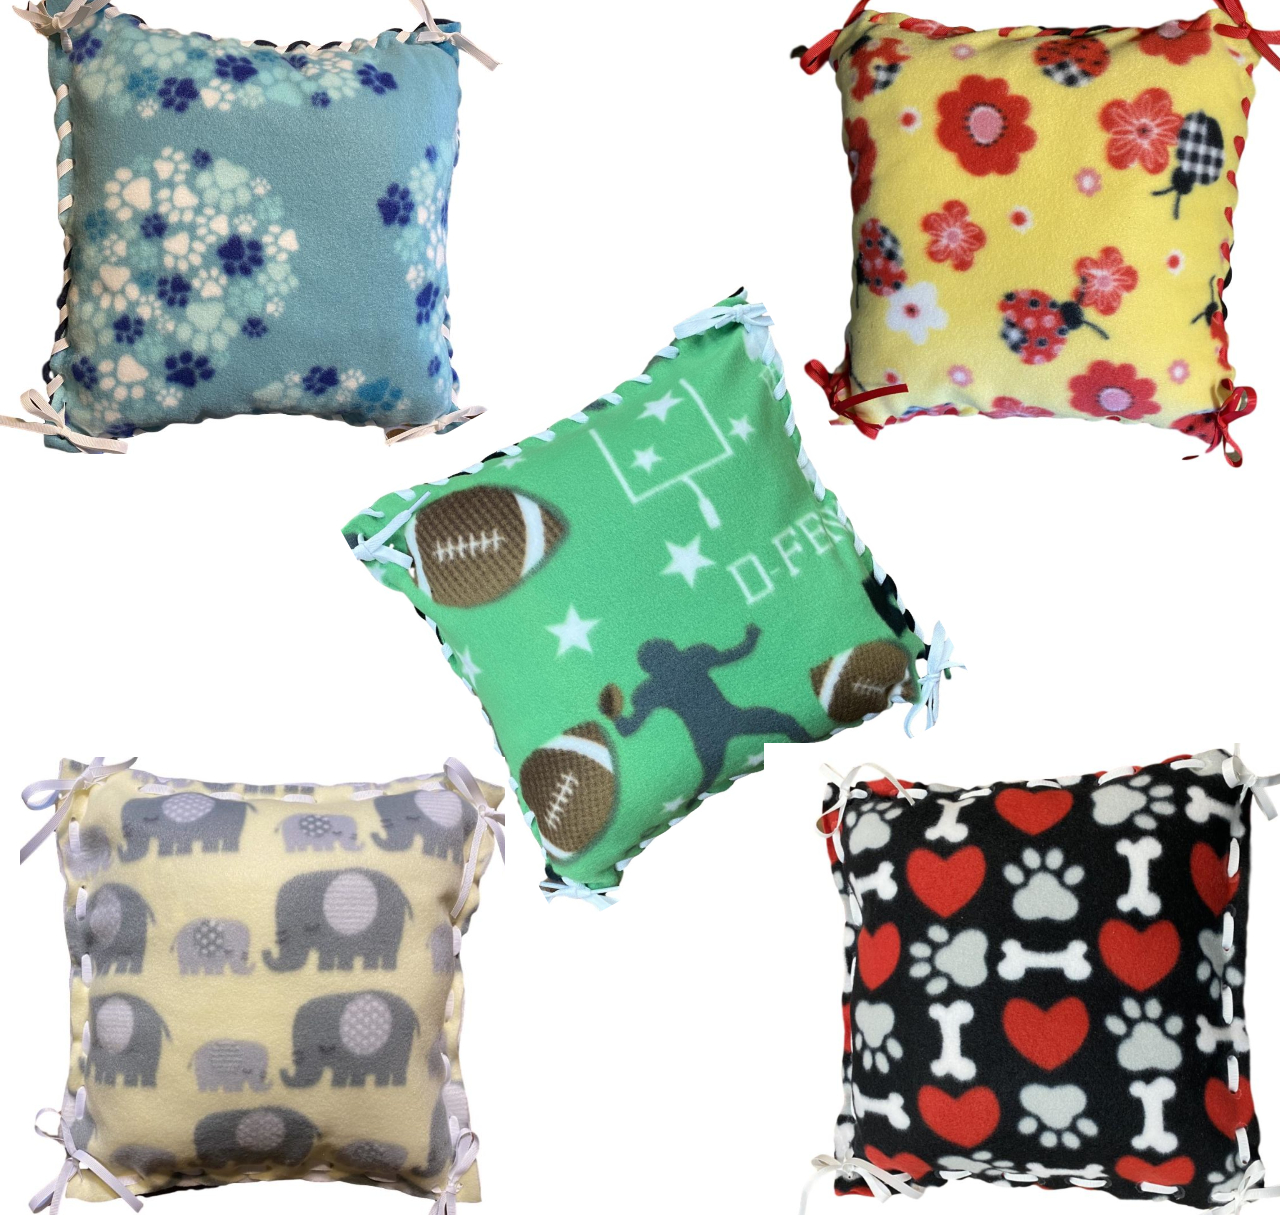 5 pack fleece pillow kits - one teal and blue paw print, one yellow, red and black lady bug, one light yellow and gray elephant, one black, white, red and gray paw print and one light green white brown and gray football pattern